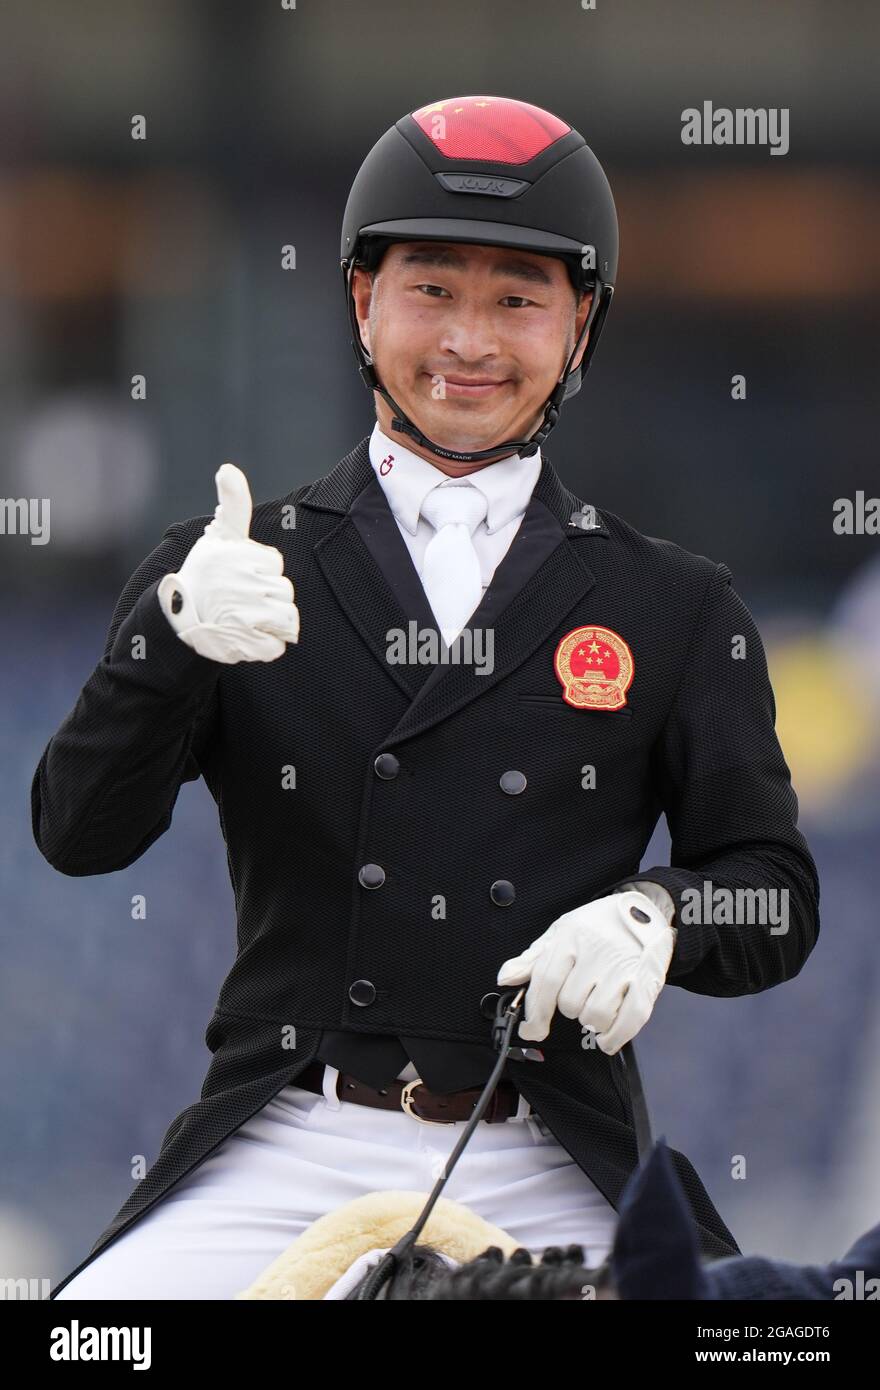 Tokyo, Japan. 31st July, 2021. Bao Yingfeng of China gestures during the equestrian dressage event at the Tokyo 2020 Olympic Games in Tokyo, Japan, July 31, 2021. Credit: Zhu Zheng/Xinhua/Alamy Live News Stock Photo